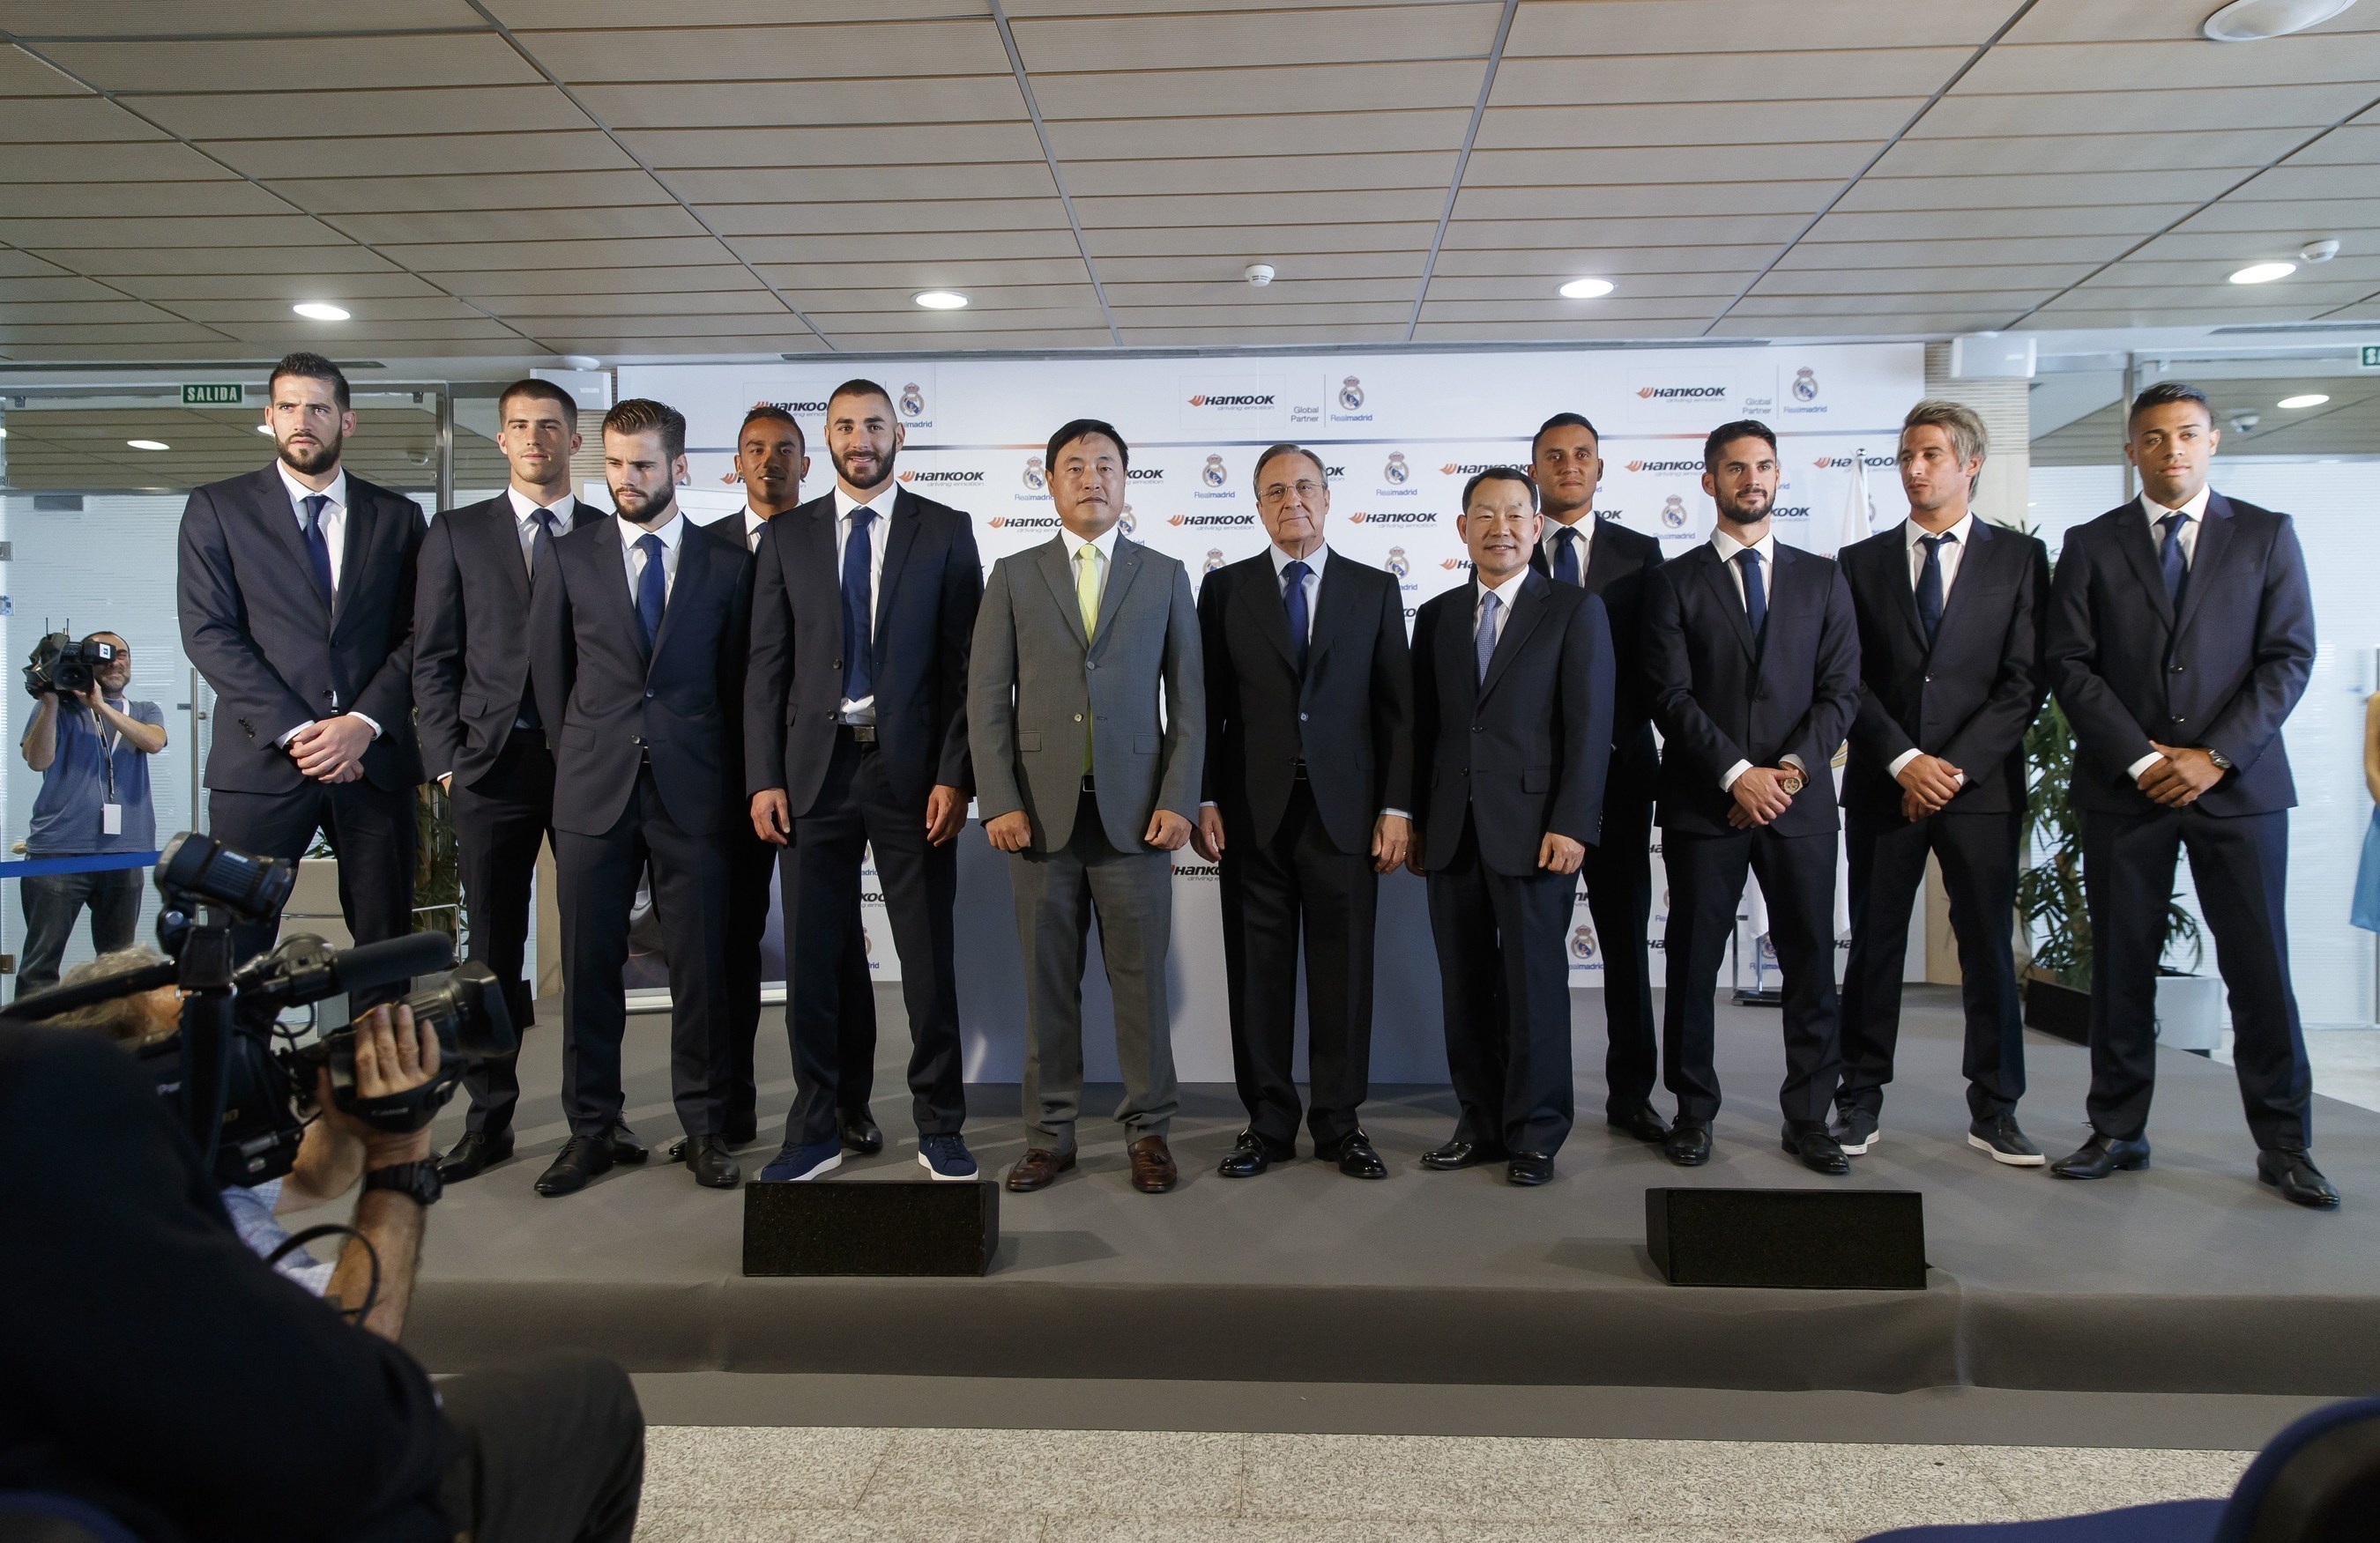 Hankook Tire and Real Madrid FC today officially signed their global partnership contract and were joined by some of the first squad players among them Karim Benzema, Nacho Fernandez Isco and Danilo. (PRNewsFoto/Hankook Tire Europe GmbH)